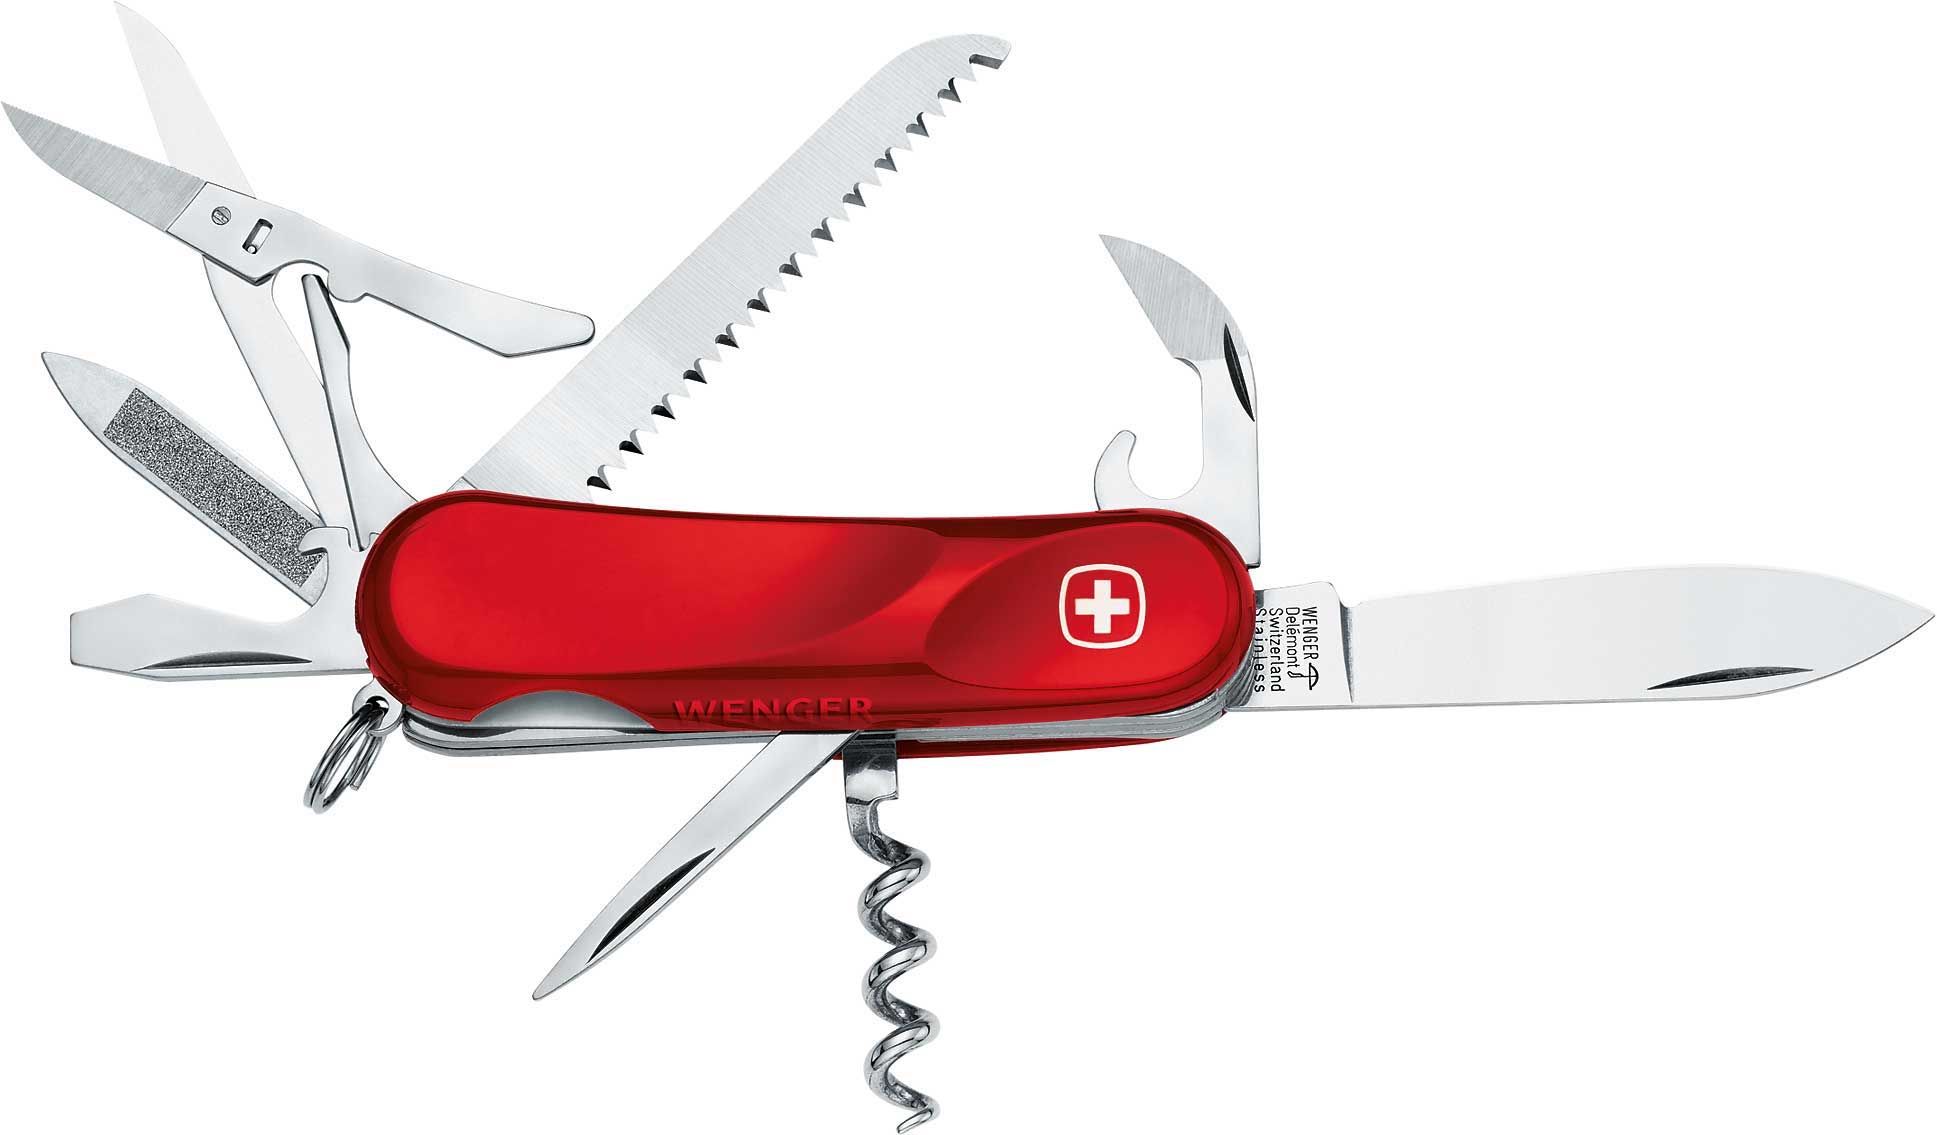 An internationally renowned product: The famous Swiss Army Knife from Wenger.